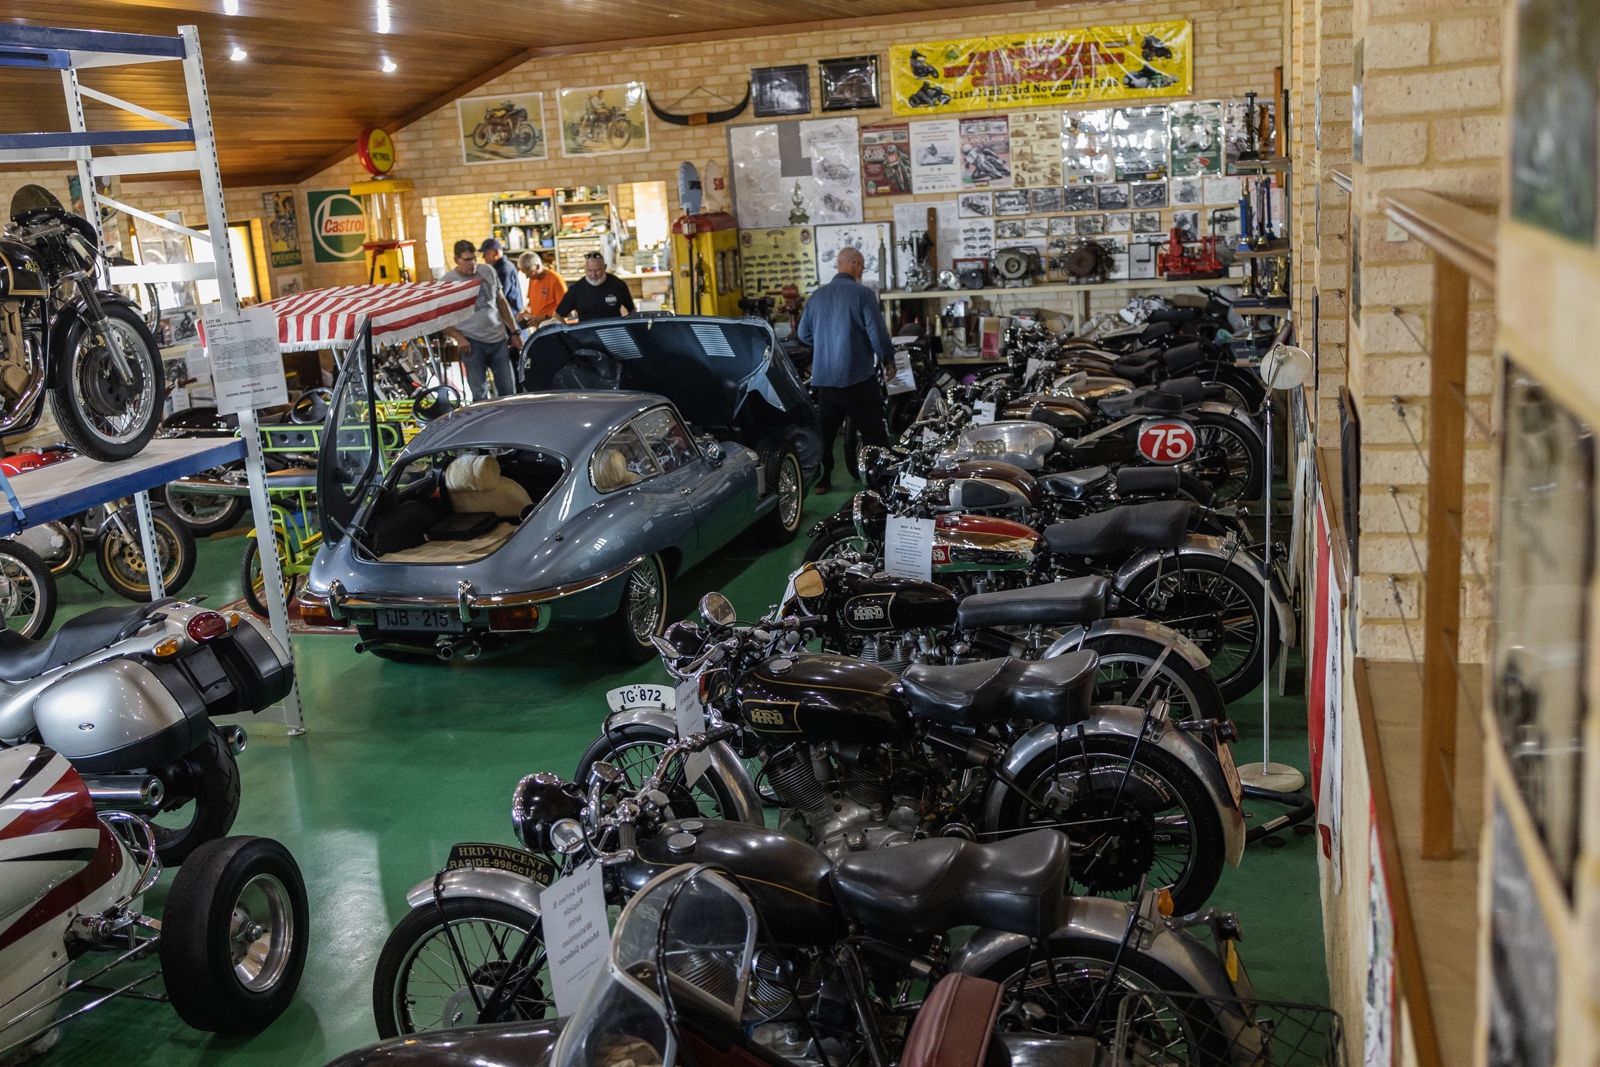 Collection of Vincent HRD motorcycles and E-Type Jaguar